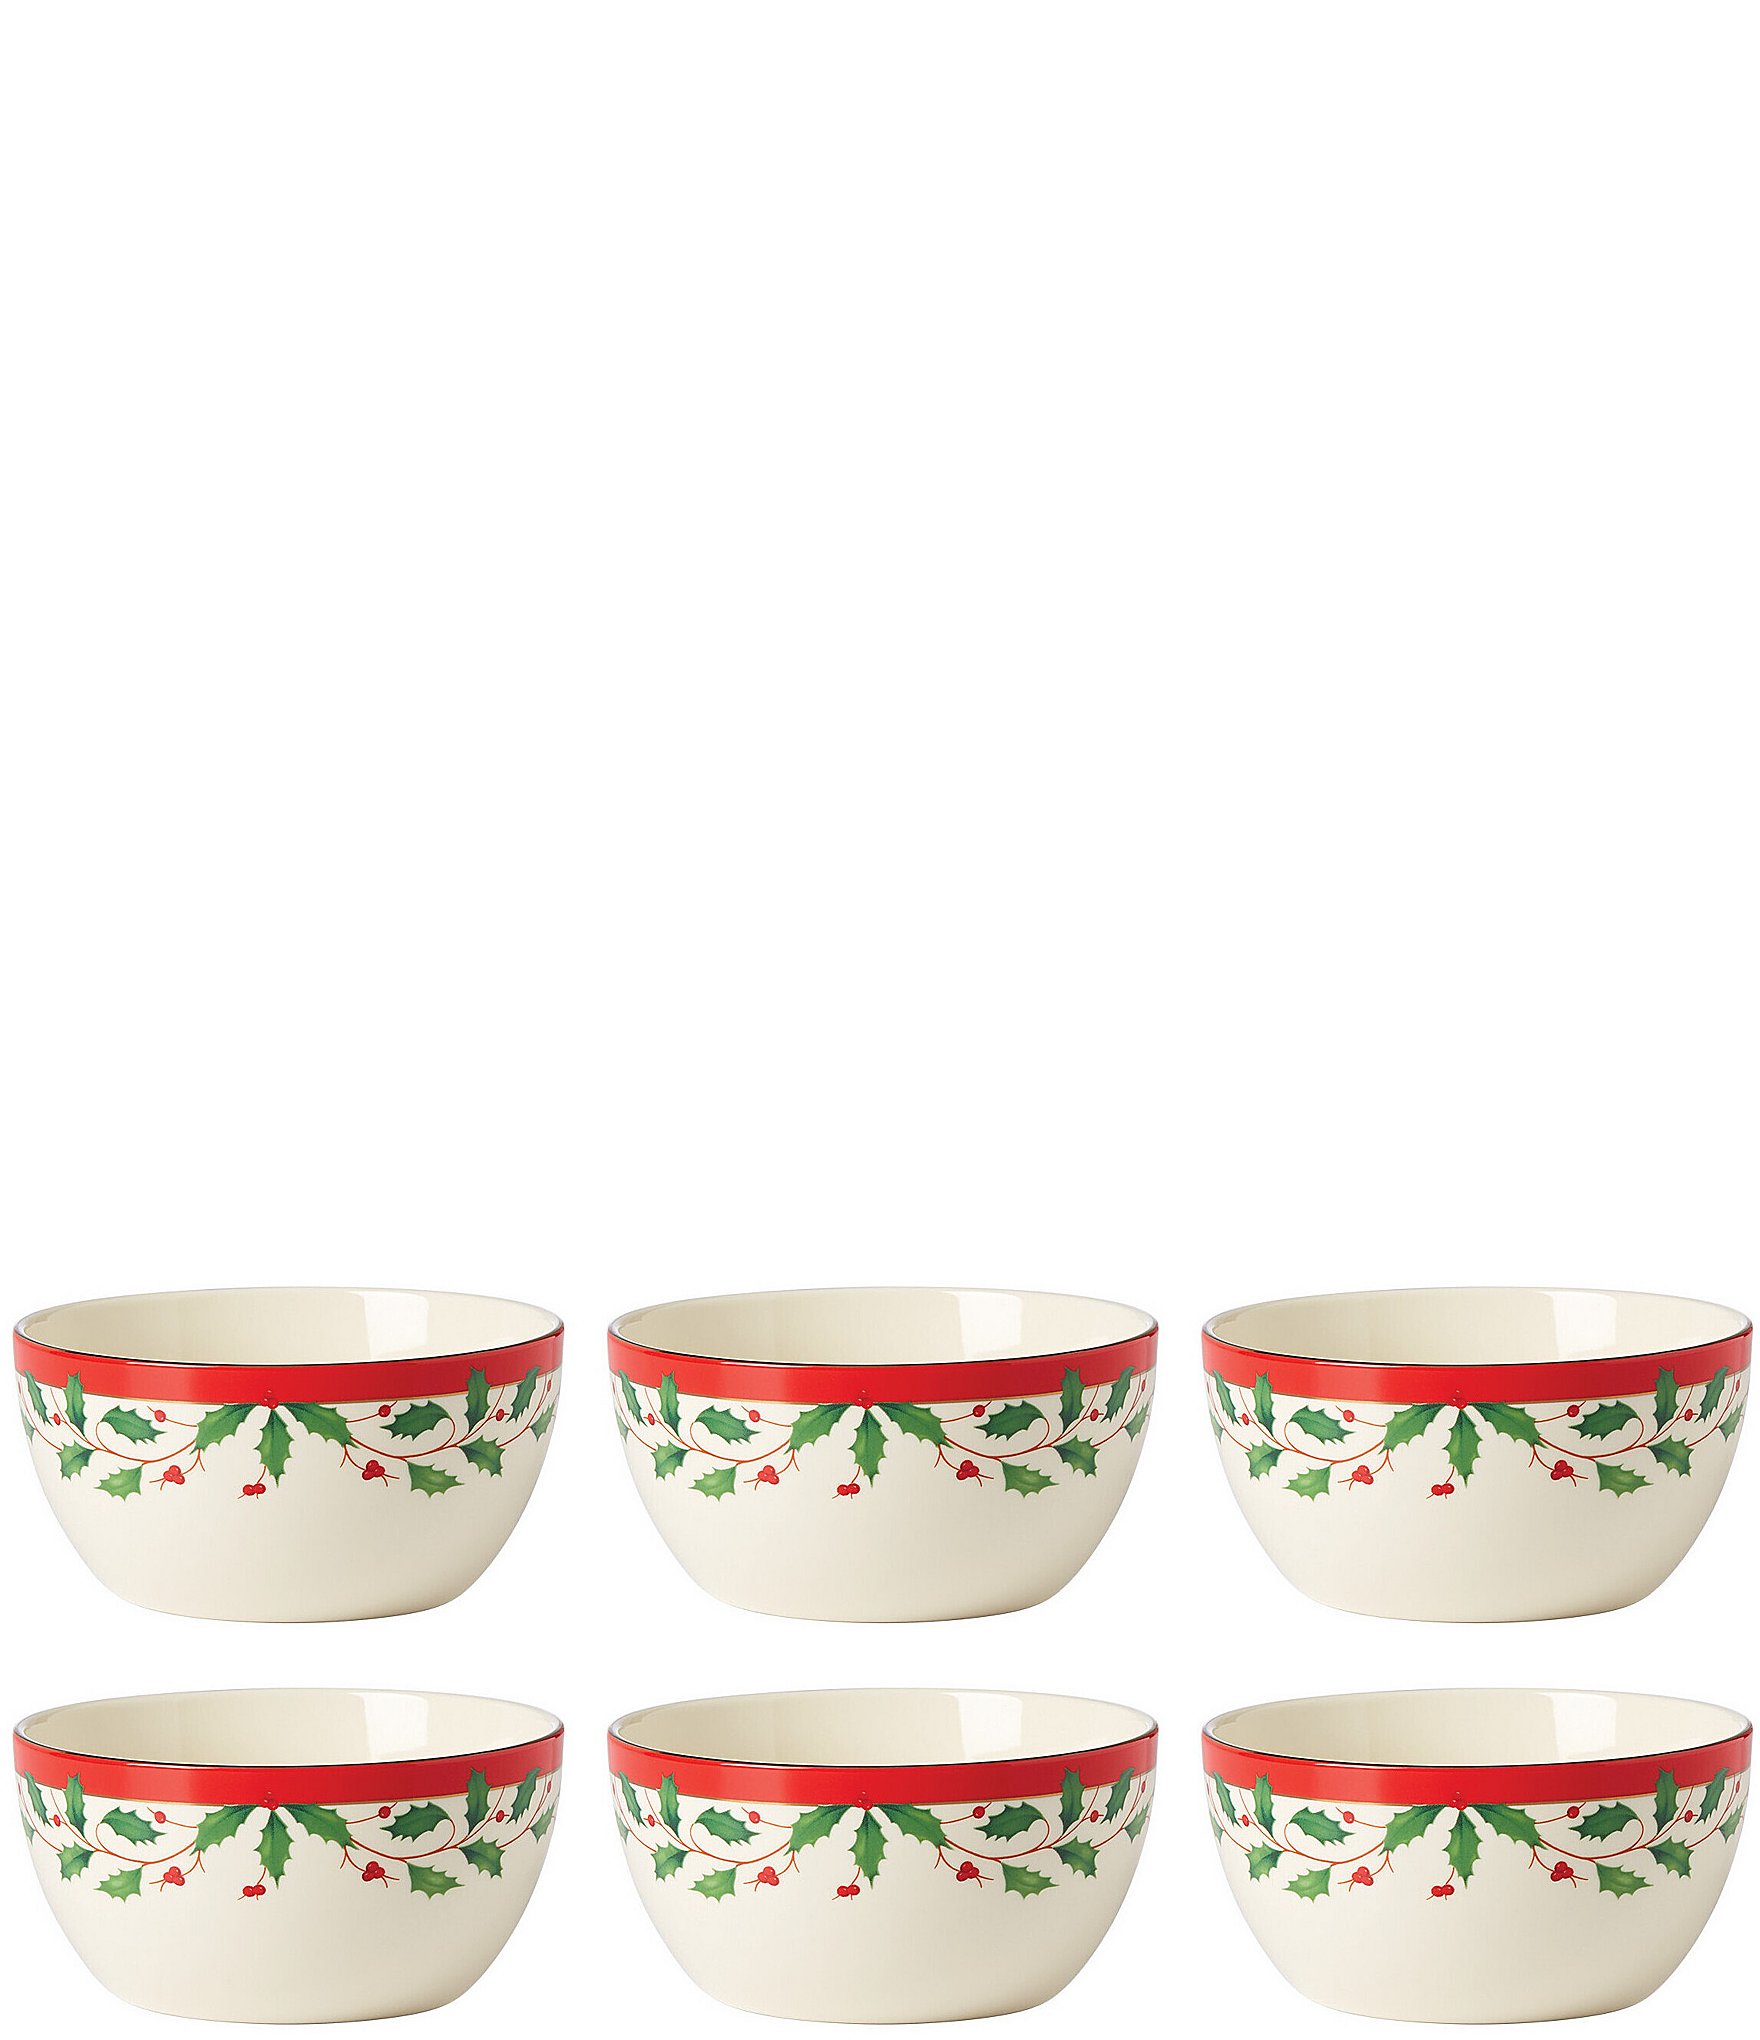 FIDDLE AND FERN SET OF 6 ROUND SNACK BOWLS 11 OZ